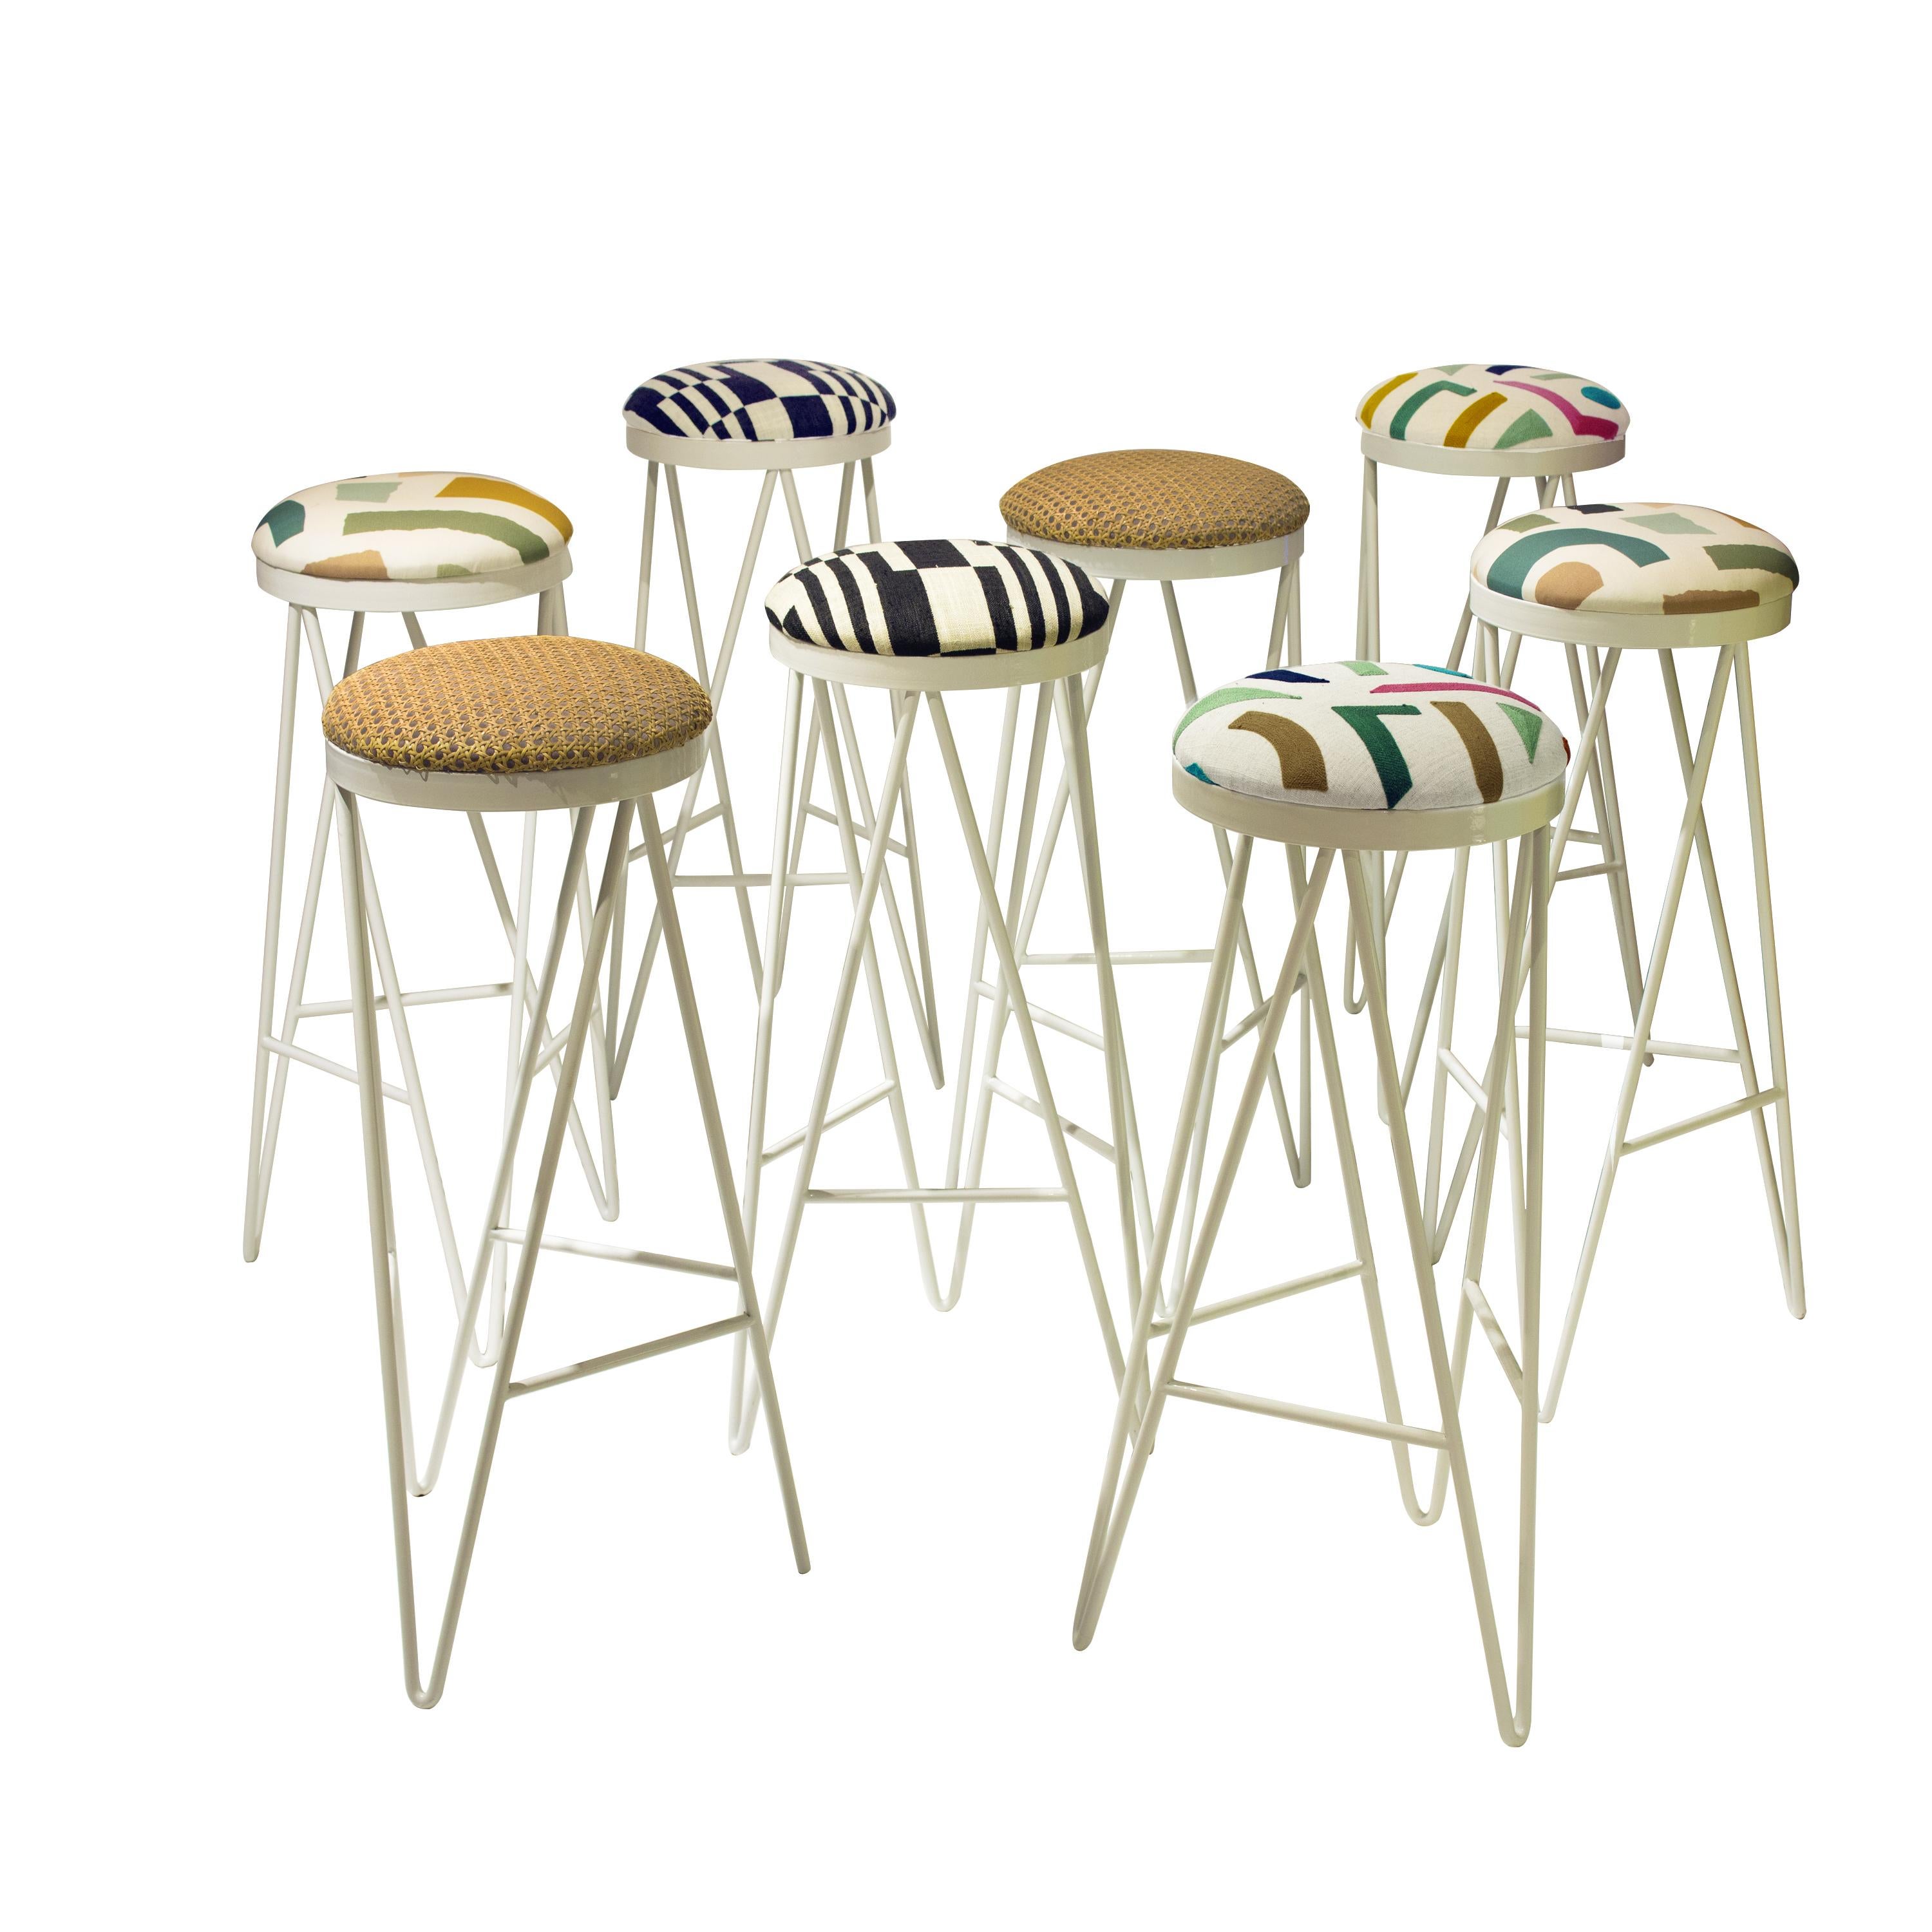 Contemporary Set of 8 Steel Stool Designed by IKB191 Studio , Spain, 2022 For Sale